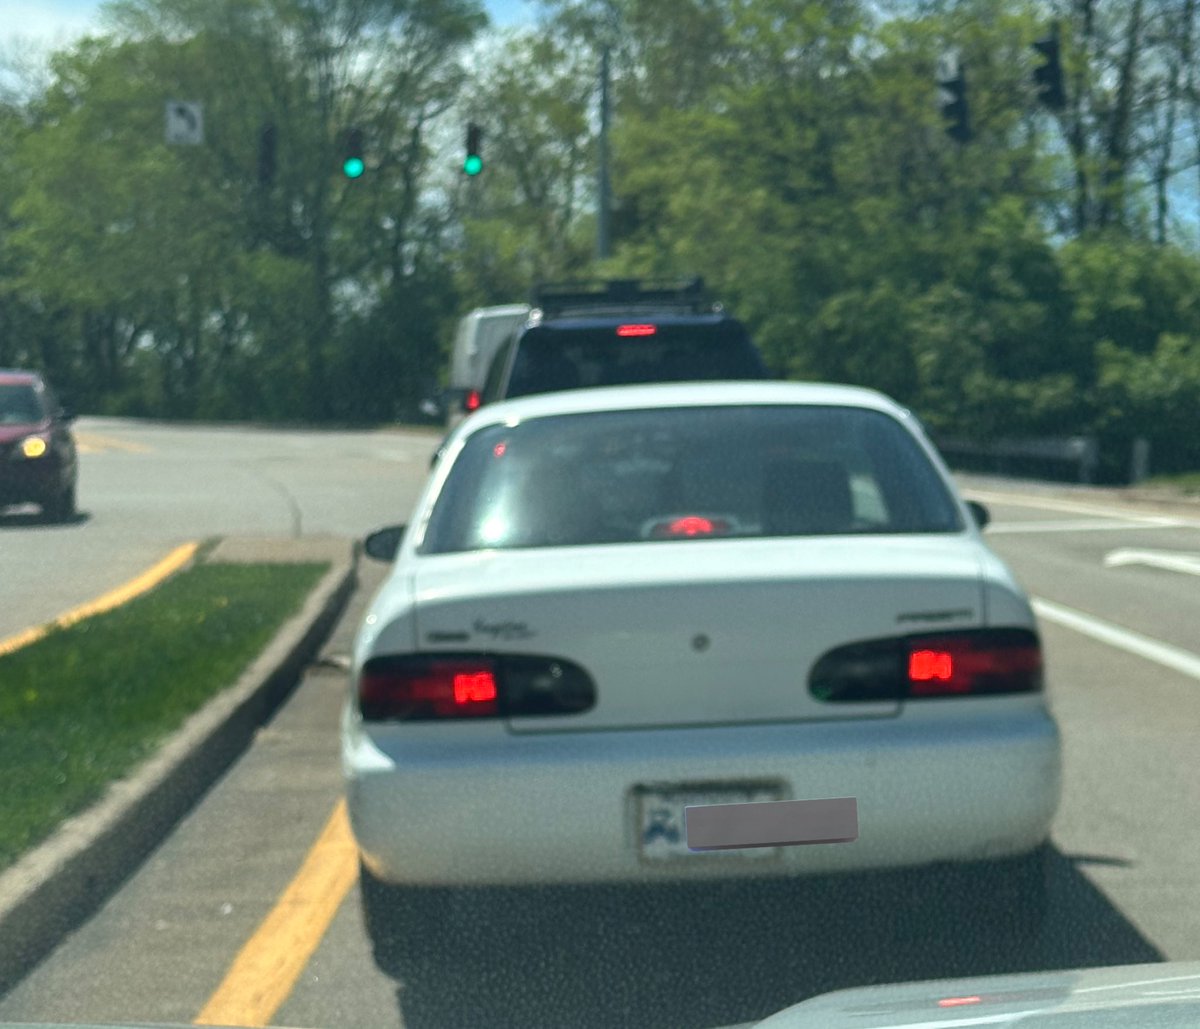 Growing more gray hair as we speak thinking about this Geo Prizm with a “historical car” license plate.